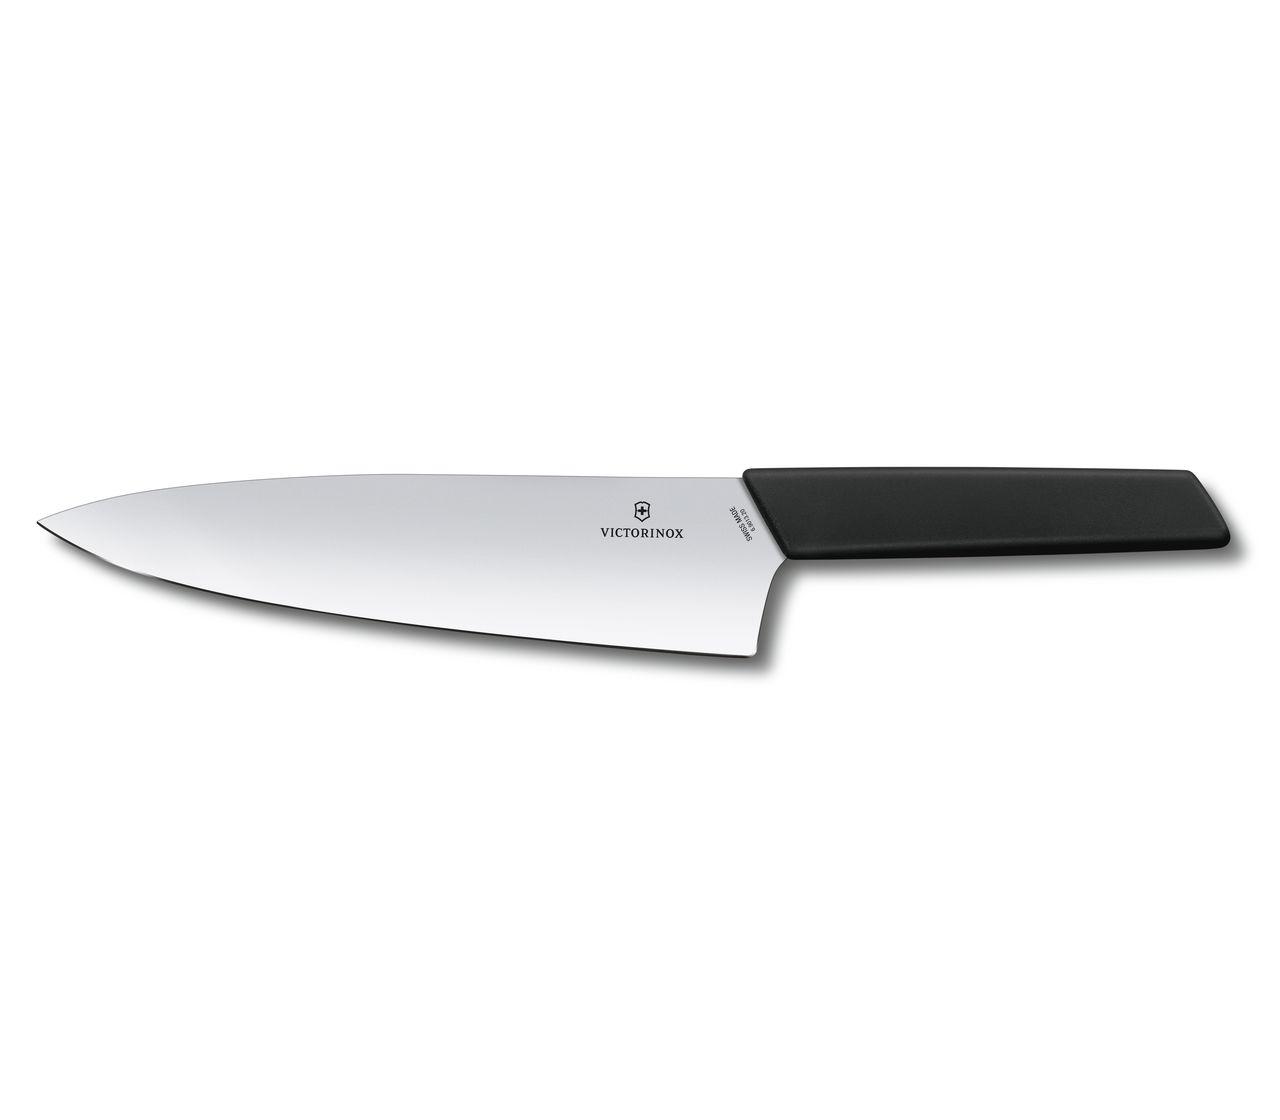 Westinghouse Electric Carving Knife 80W Black –